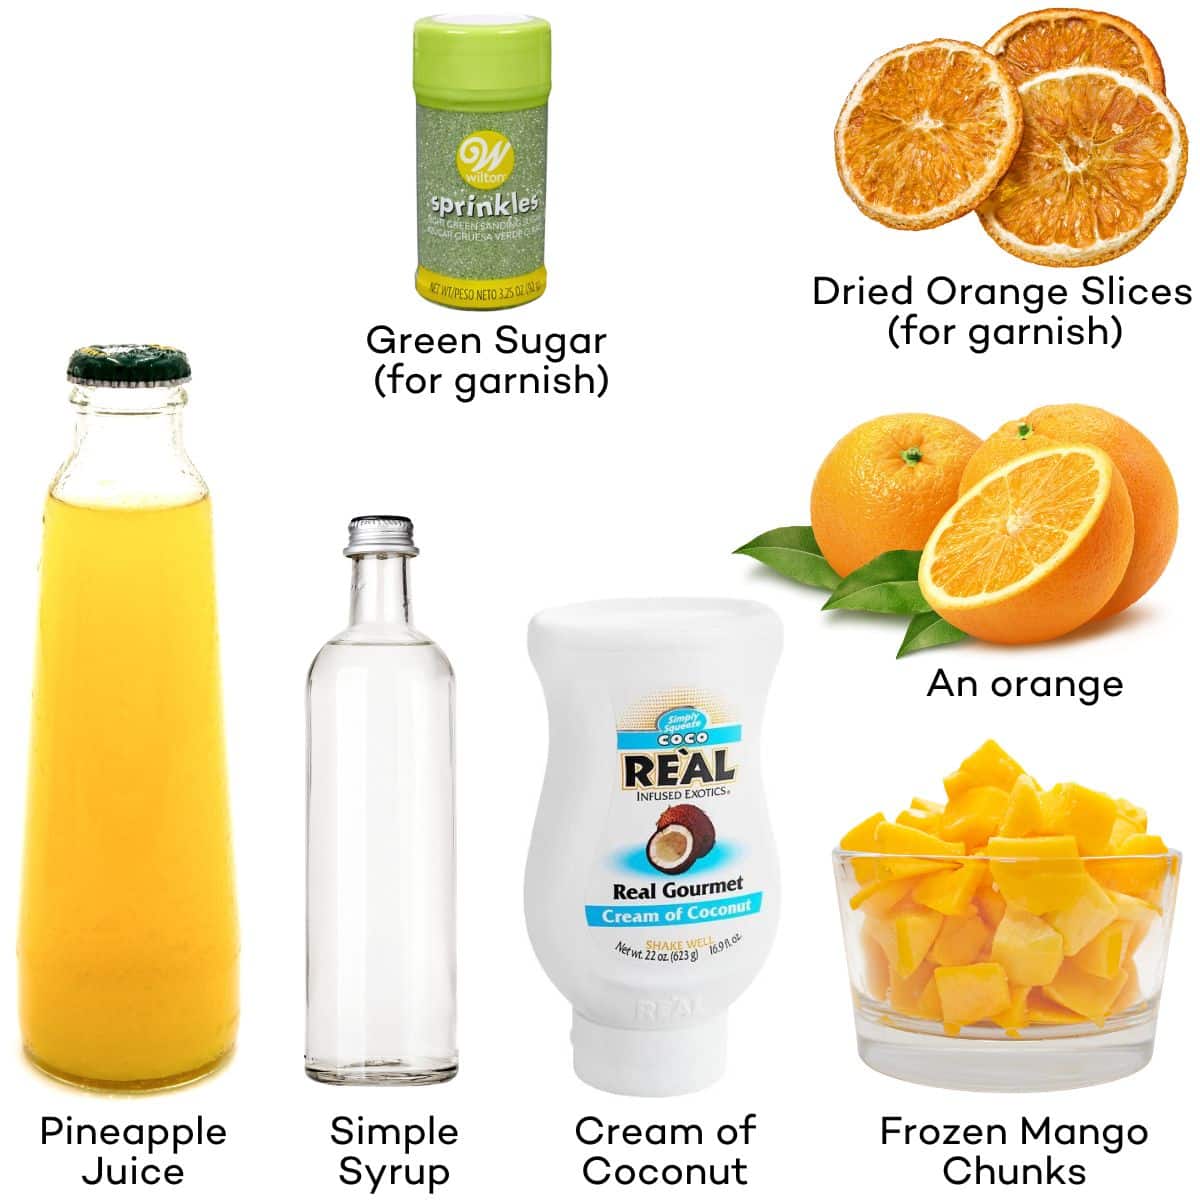 Ingredients for a non-alcoholic Halloween drink: Pineapple juice, cream of coconut, mango chunks, fresh orange, simple syrup, green decorating sugar, dried orange slices. 